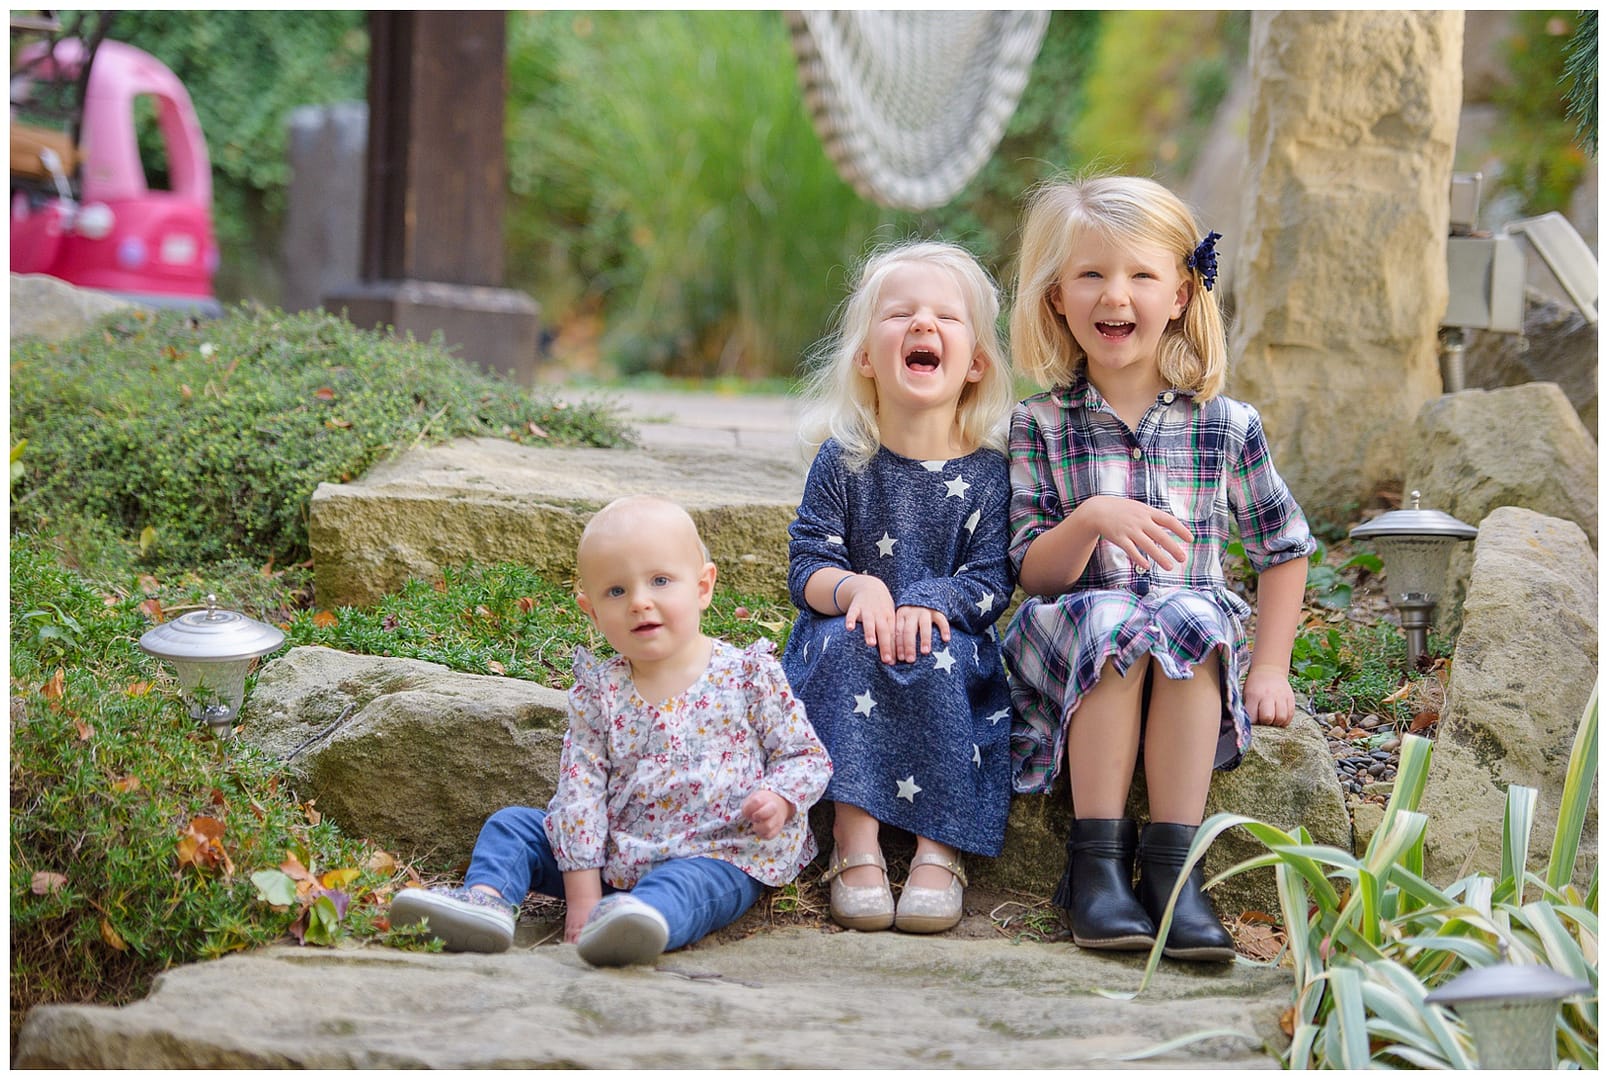 Three sisters laugh on steps in their yard. Photo by Tiffany Hix Photography.